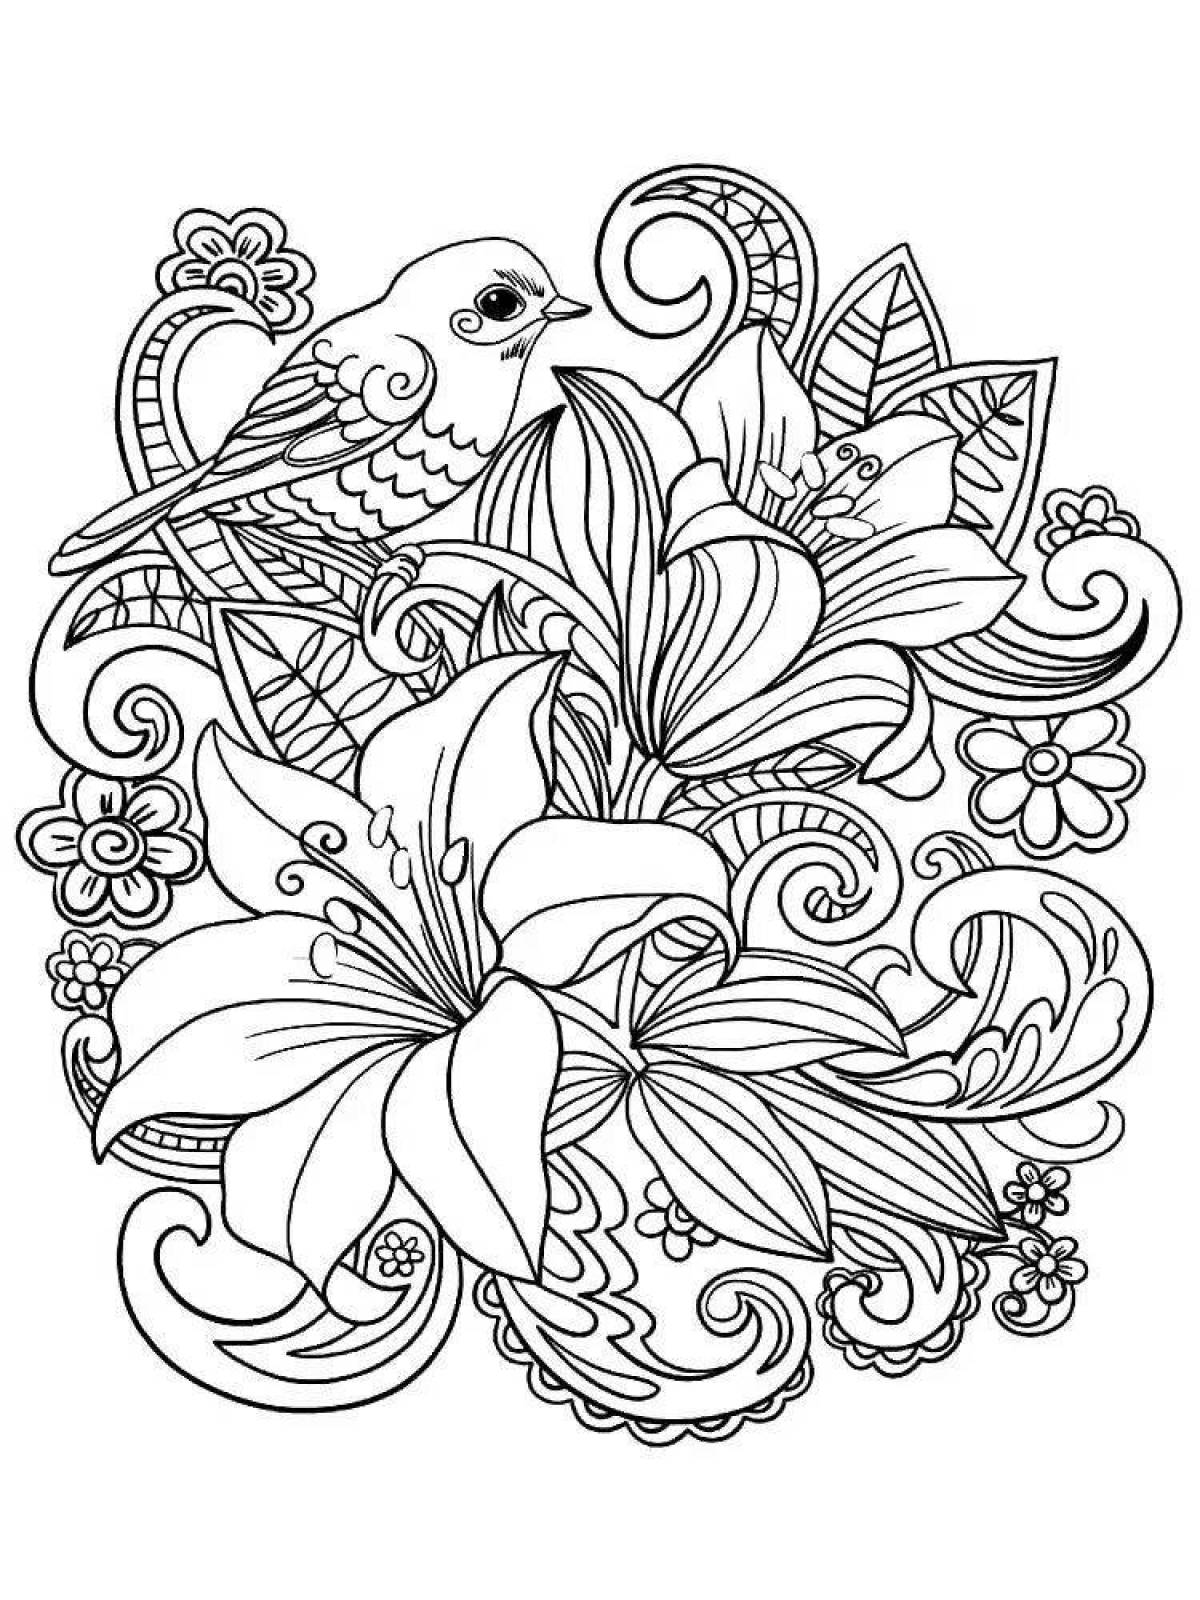 Inviting coloring flowers antistress